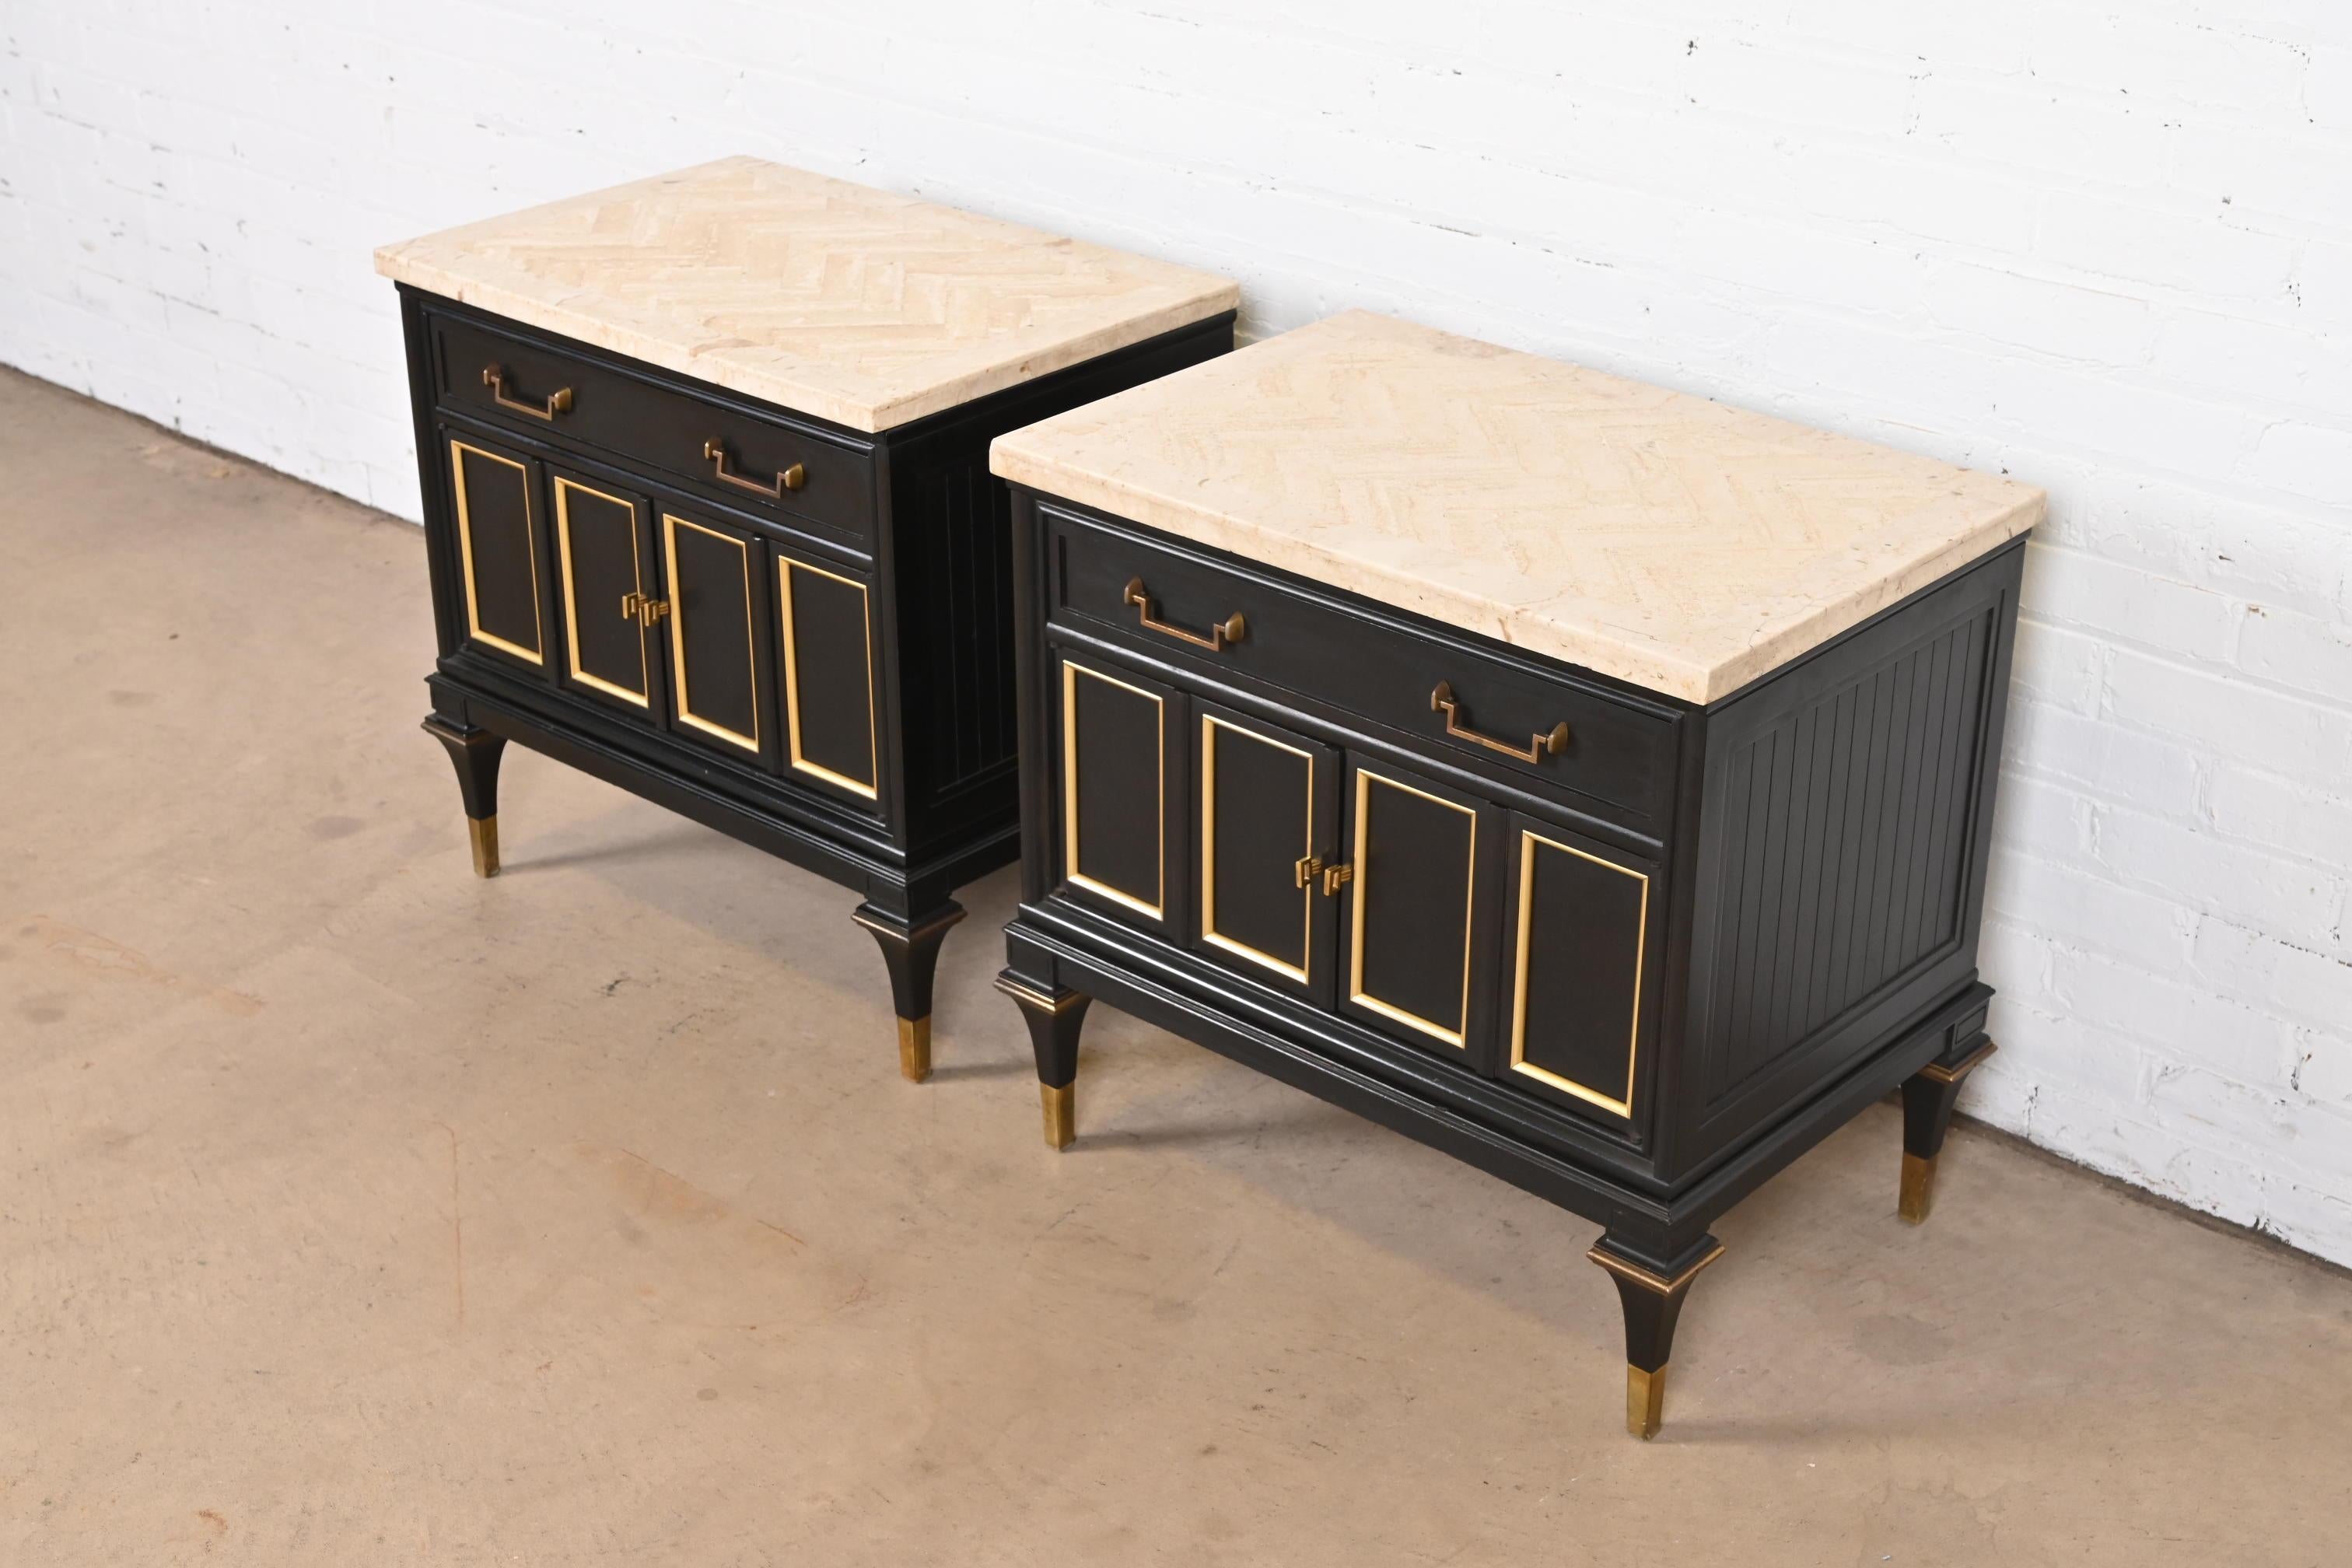 American Mastercraft Hollywood Regency Black Lacquer and Brass Travertine Top Nightstands